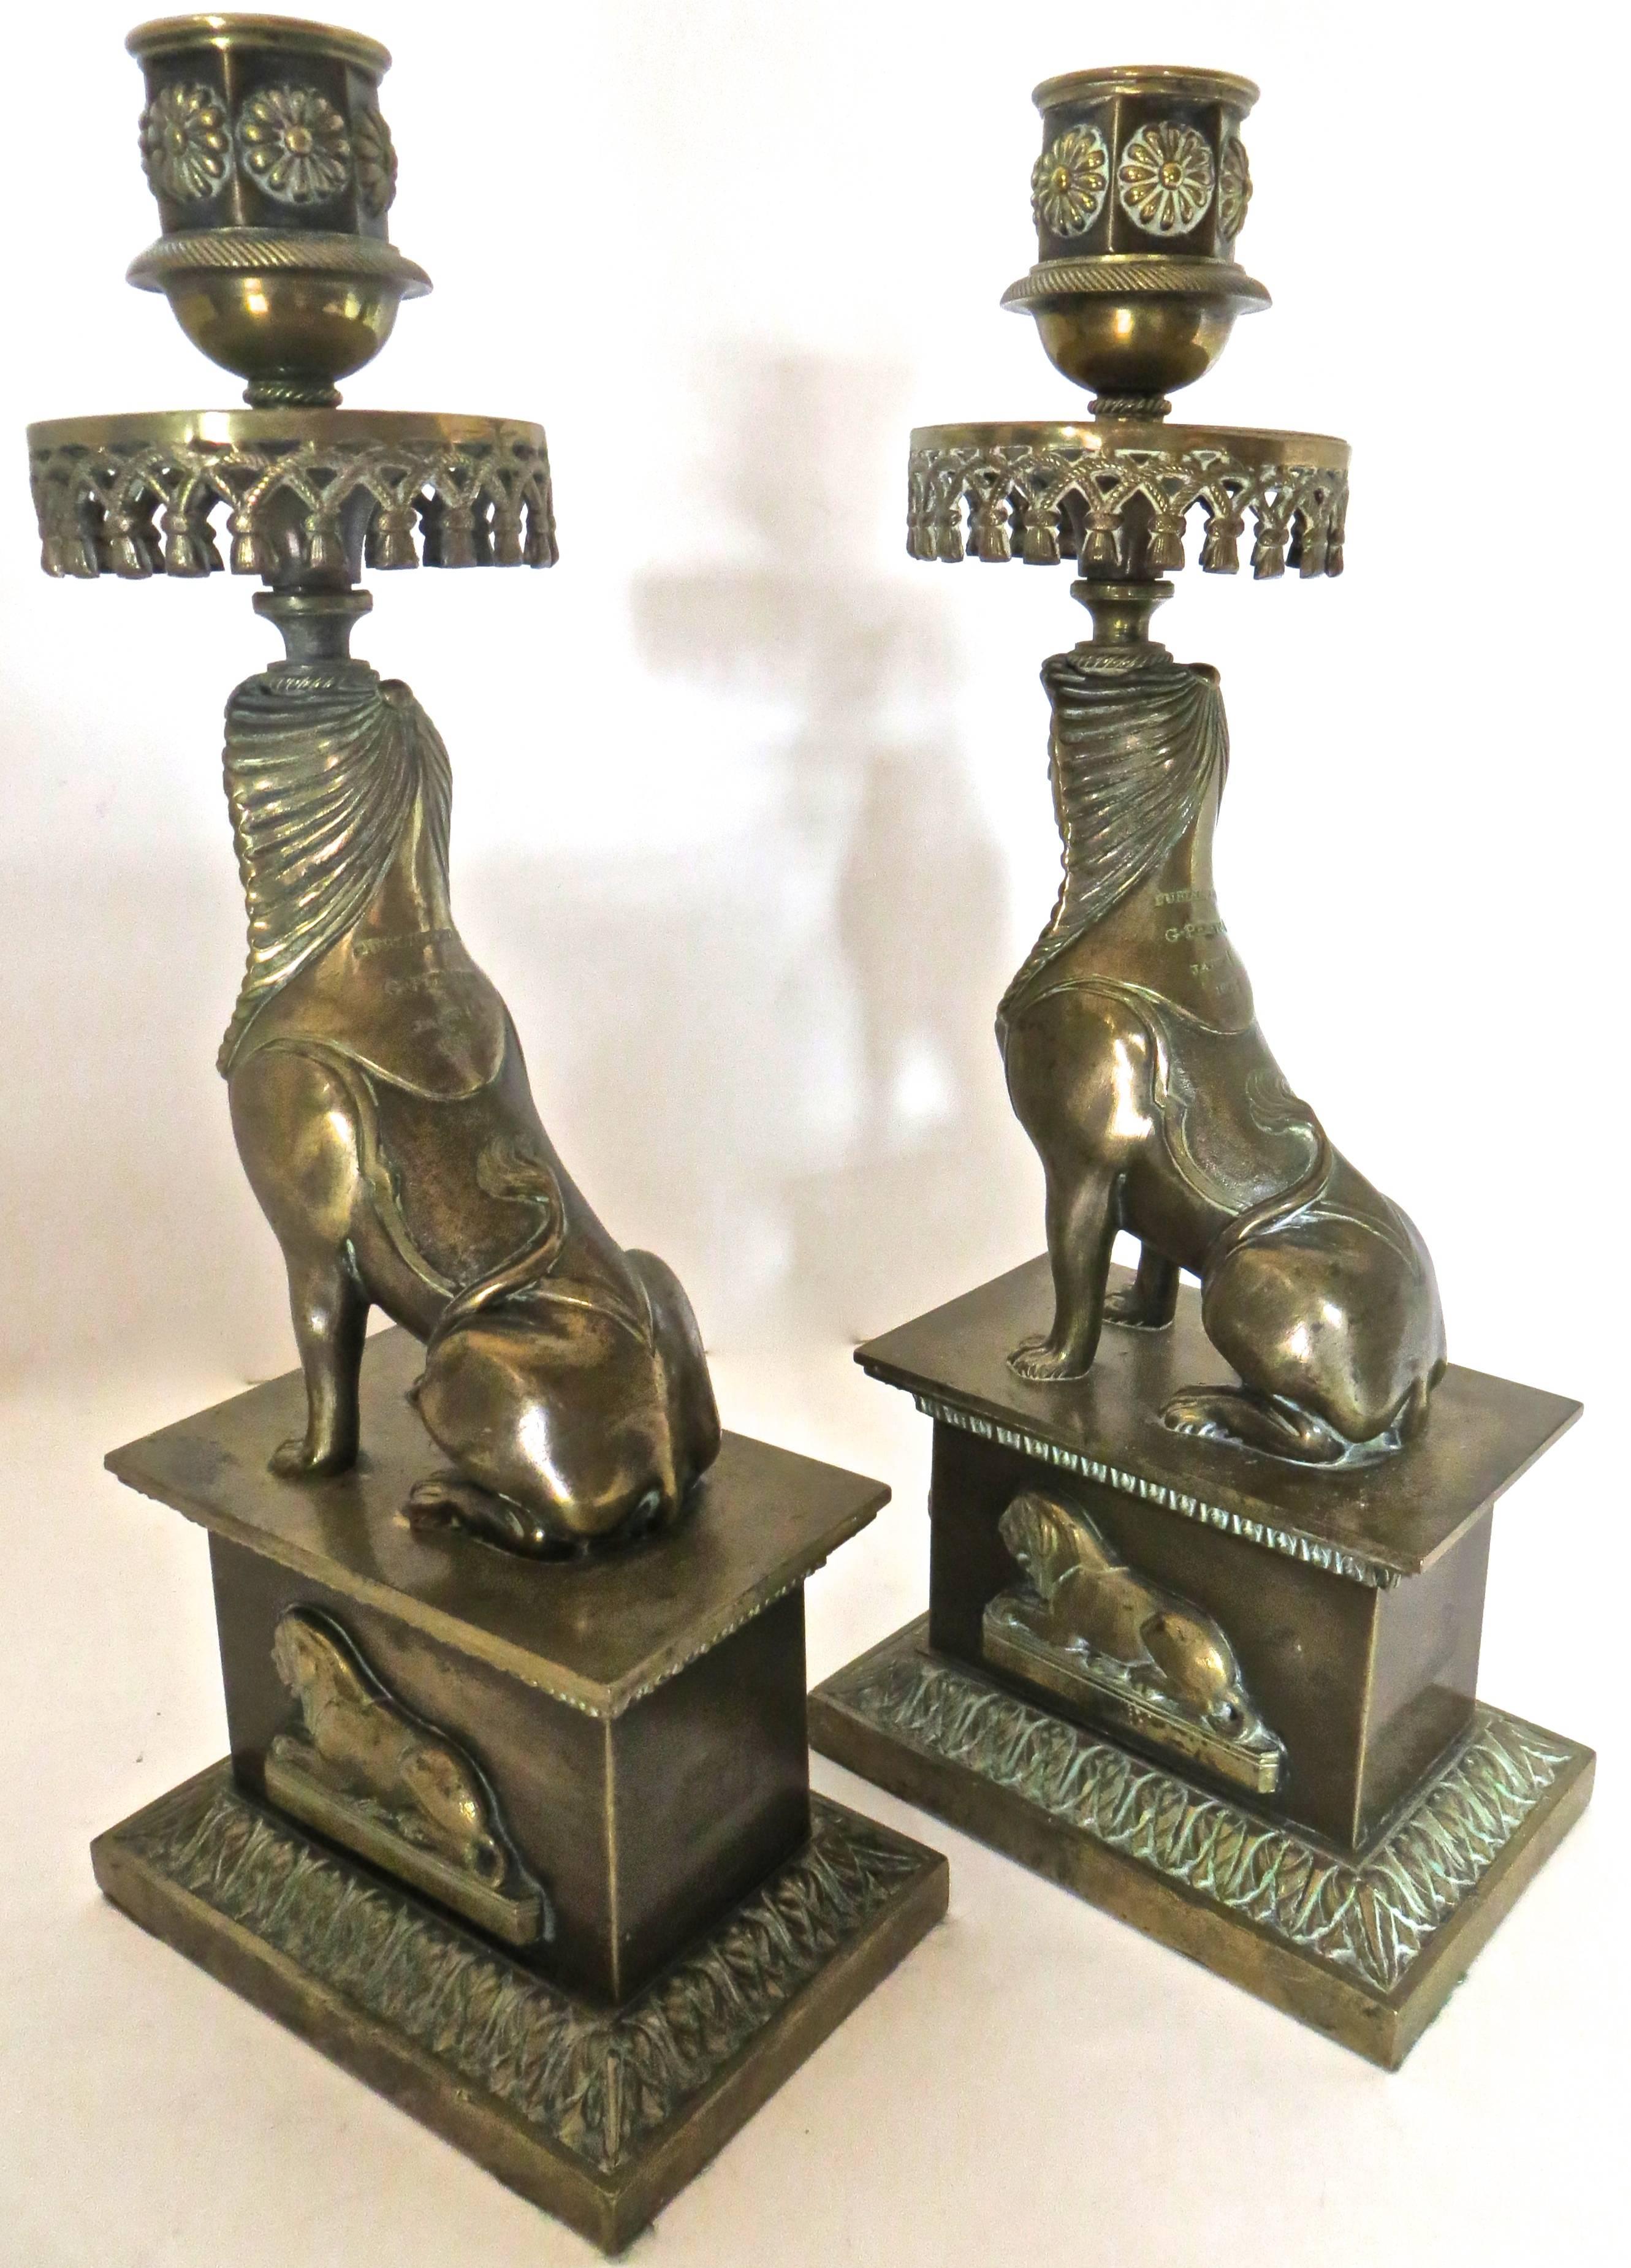 Pair of Regency bronze candleholders from the London, England workshop of George Penton on New Street Fetter Lane. He was well known and recognized by both British and American connoisseurs of fine art during the late 18th and early 19th century.